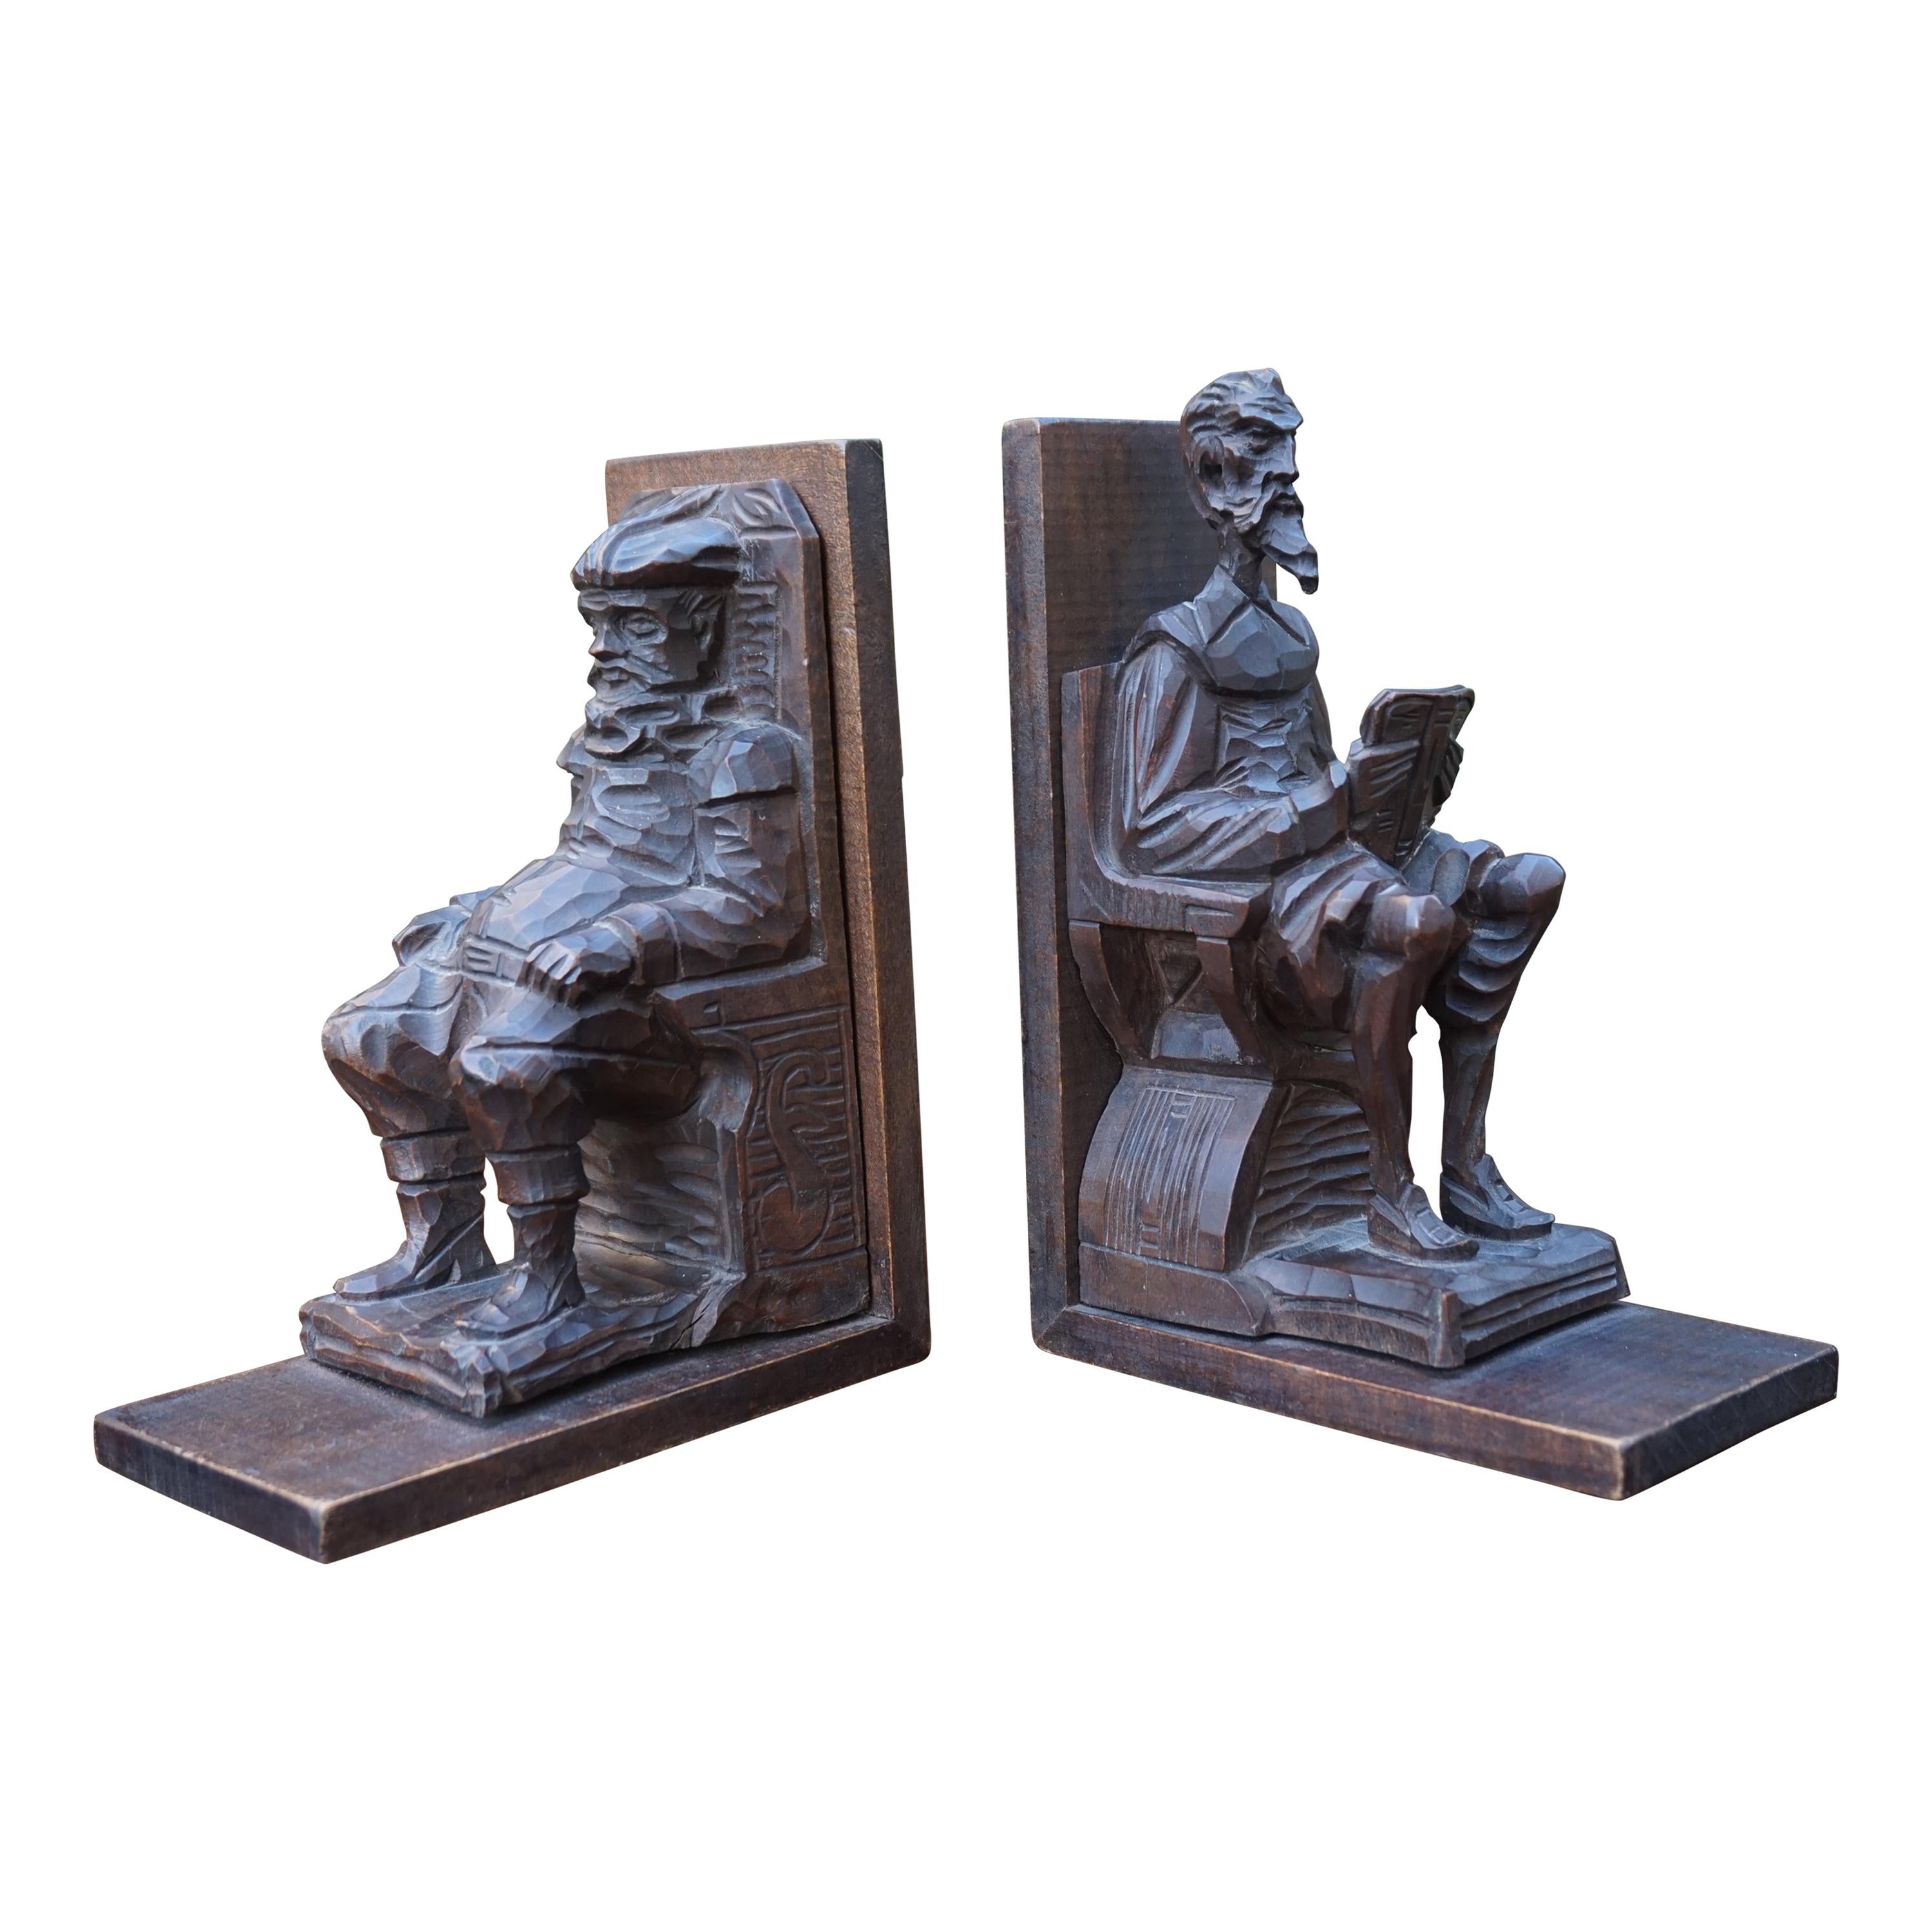 Near Antique Hand Carved Wooden Don Quixote and Sancho Panza Sculpture Bookends